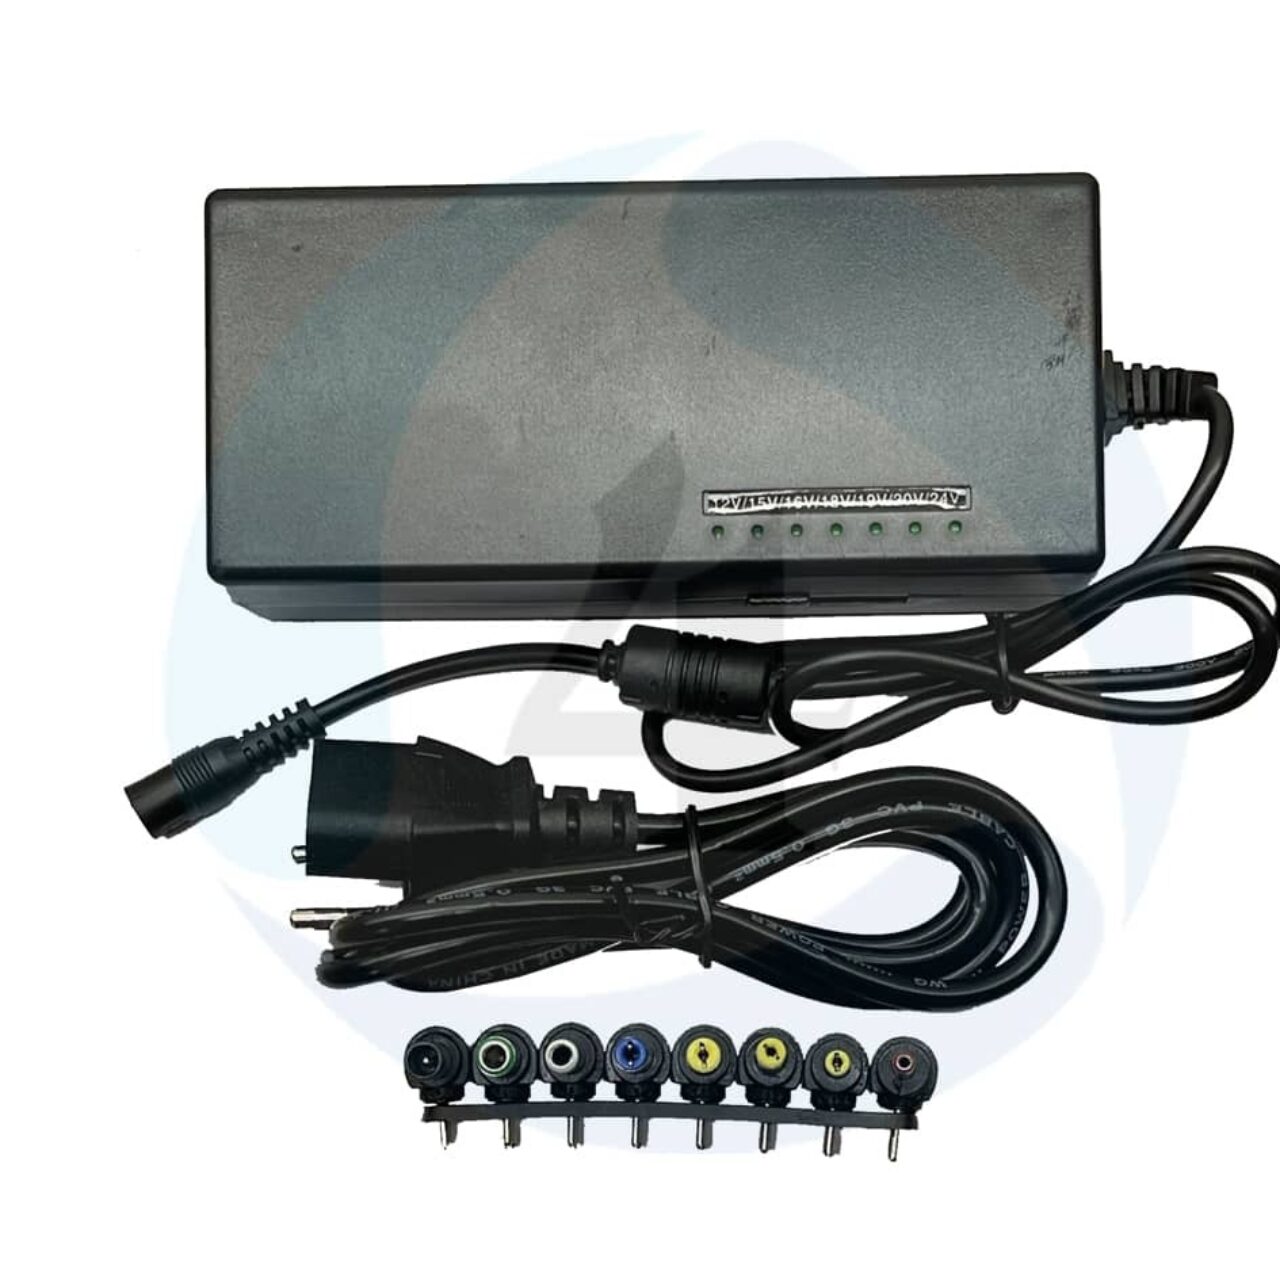 Universal Laptop Charger 30 W with 8 connectors